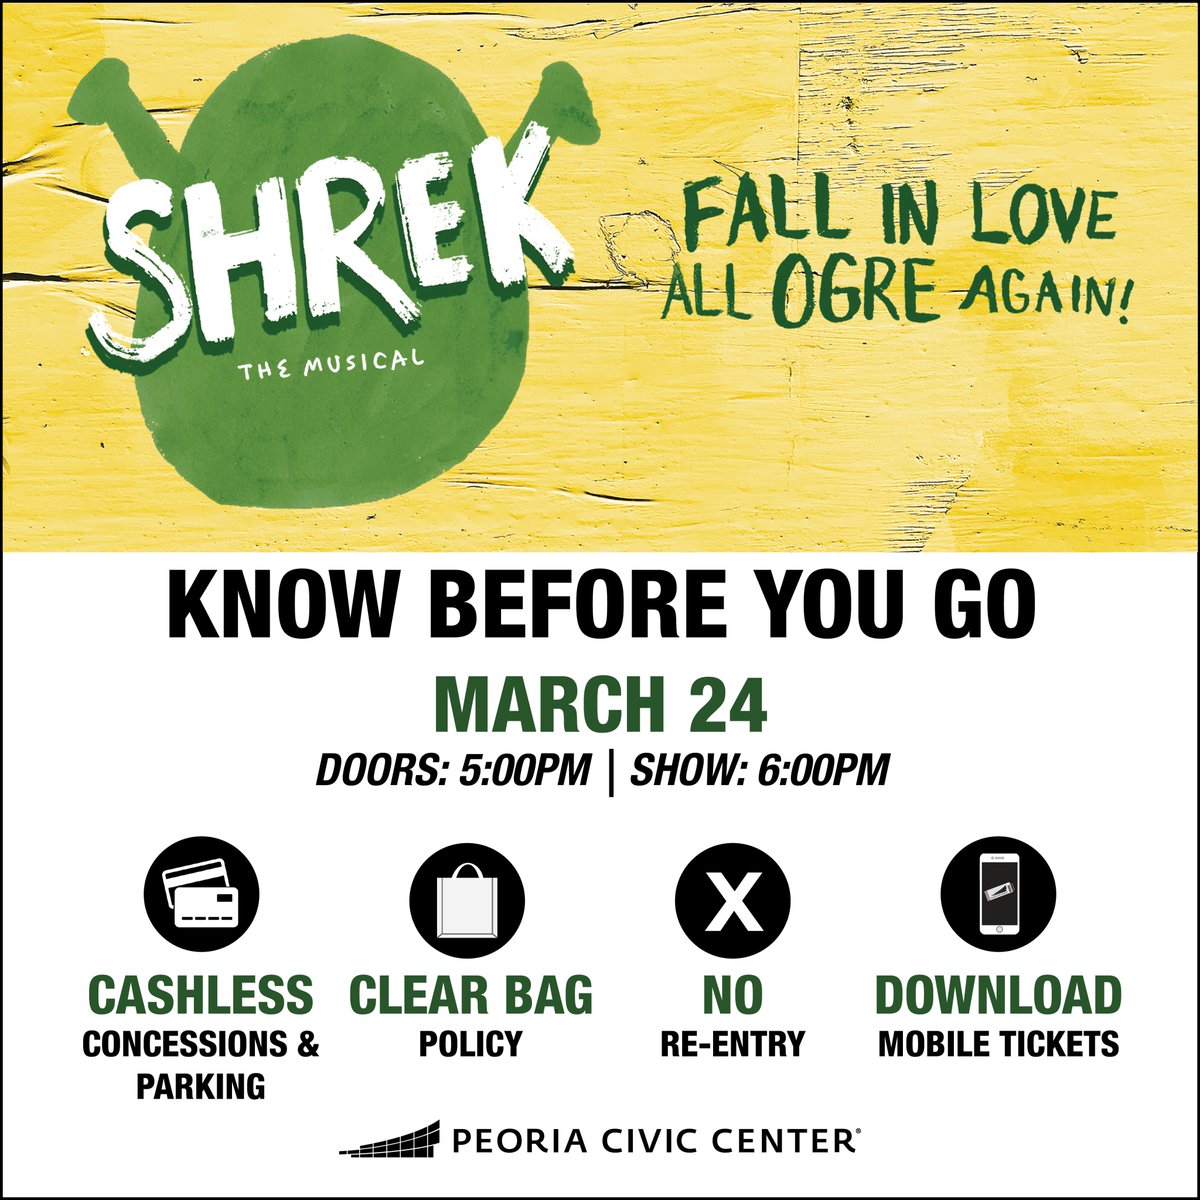 KNOW BEFORE YOU GO Bulls, Bands, & Barrels, Hasan Minhaj, and Shrek the Musical will all be at the Peoria Civic Center this weekend!! Here are some important reminders before you go to the show. More details at bit.ly/PCCKnowBeforeY…